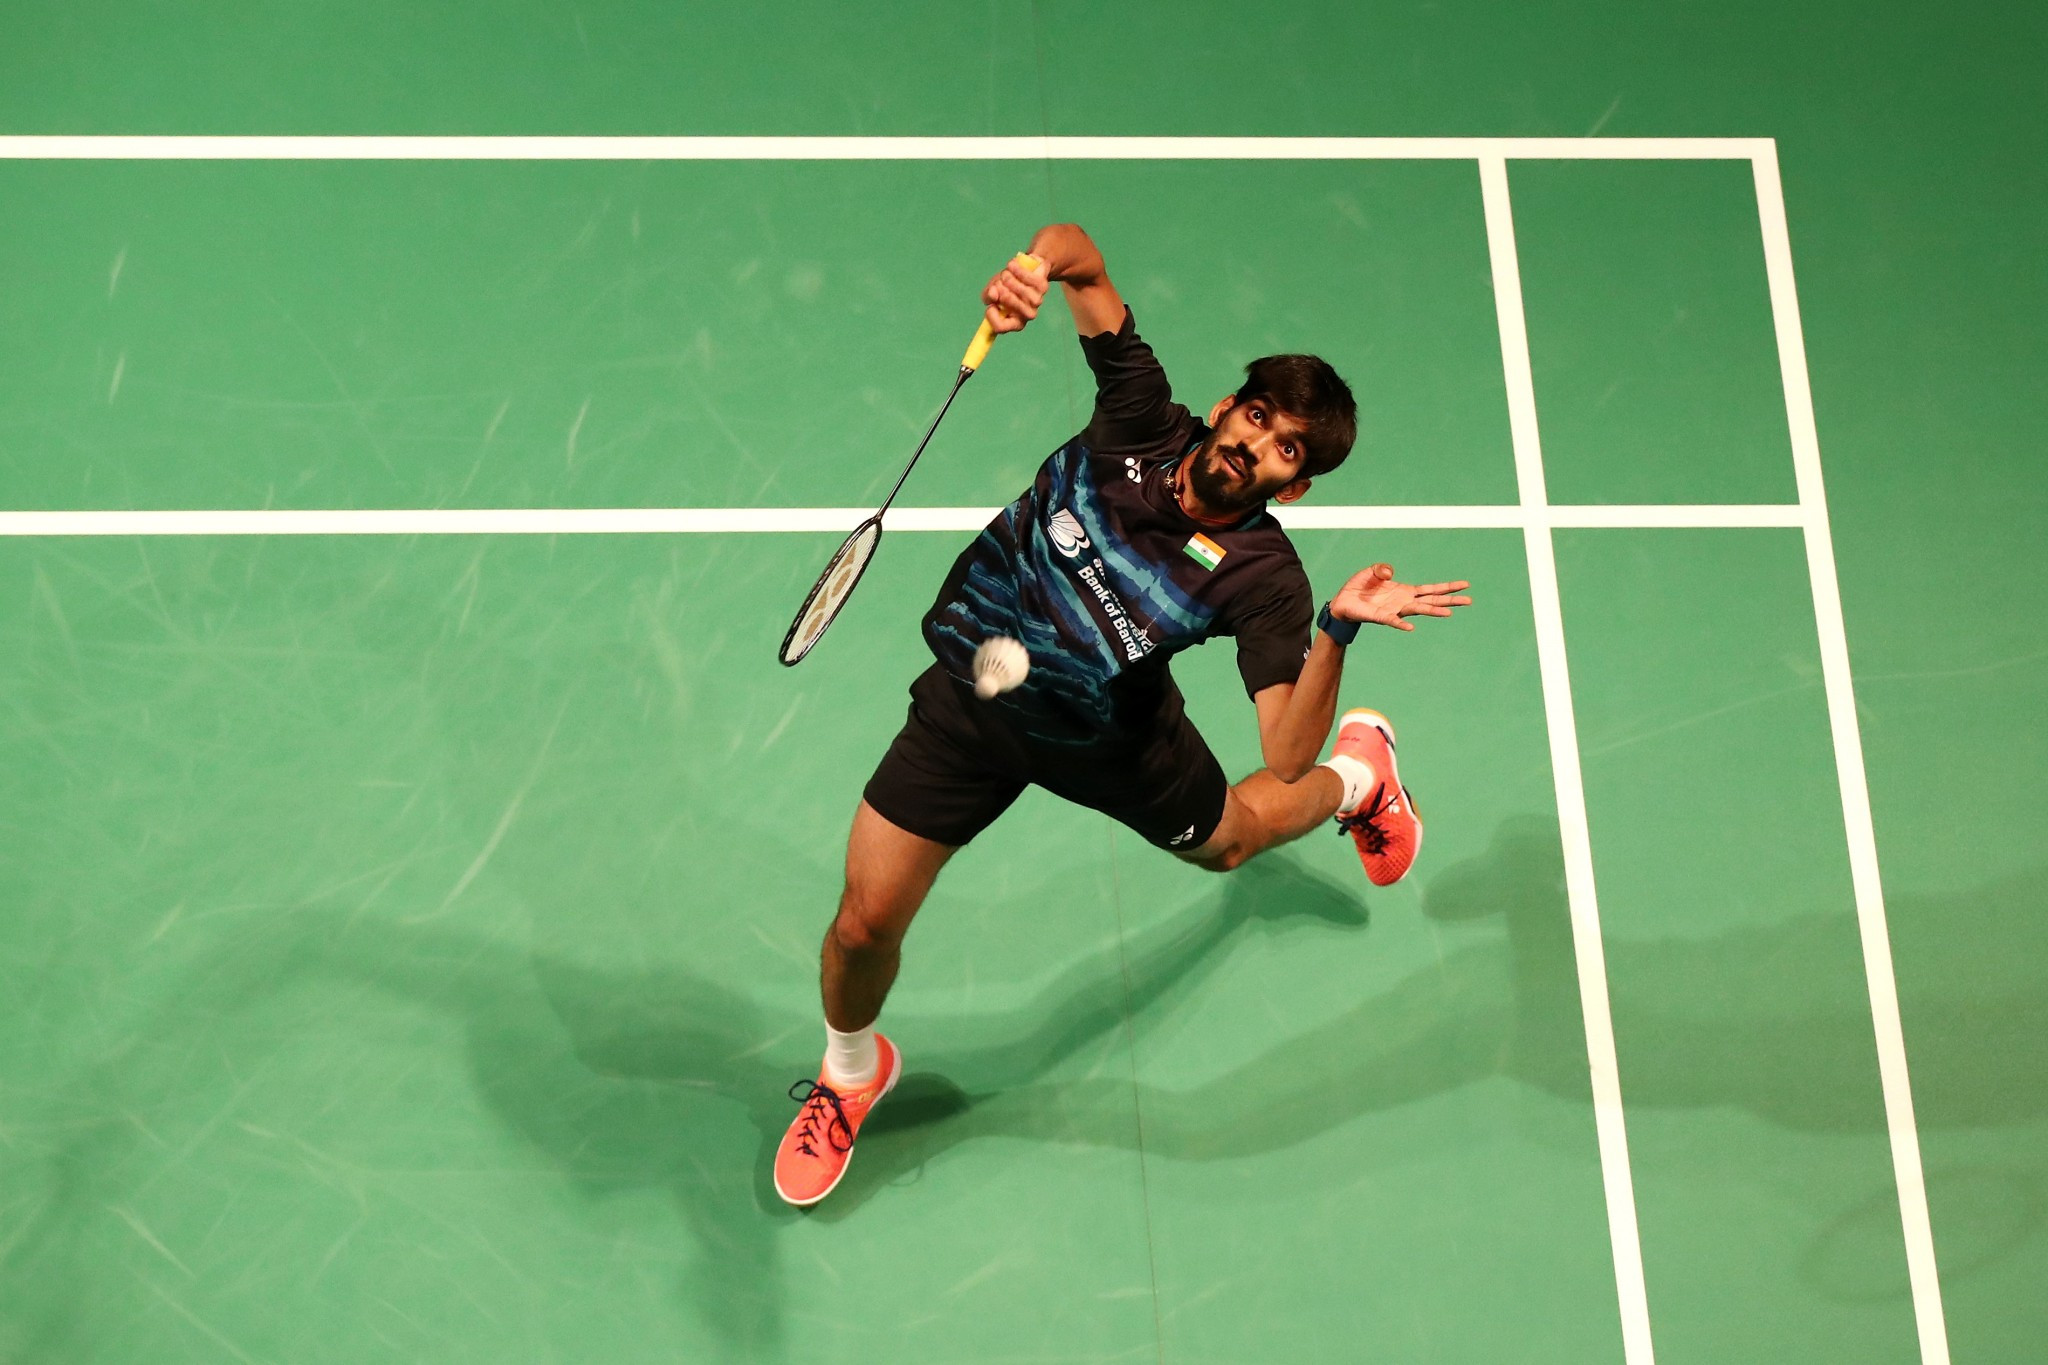 India's Srikanth Kidambi eased to victory in the first round of the men's singles competition ©Getty Images